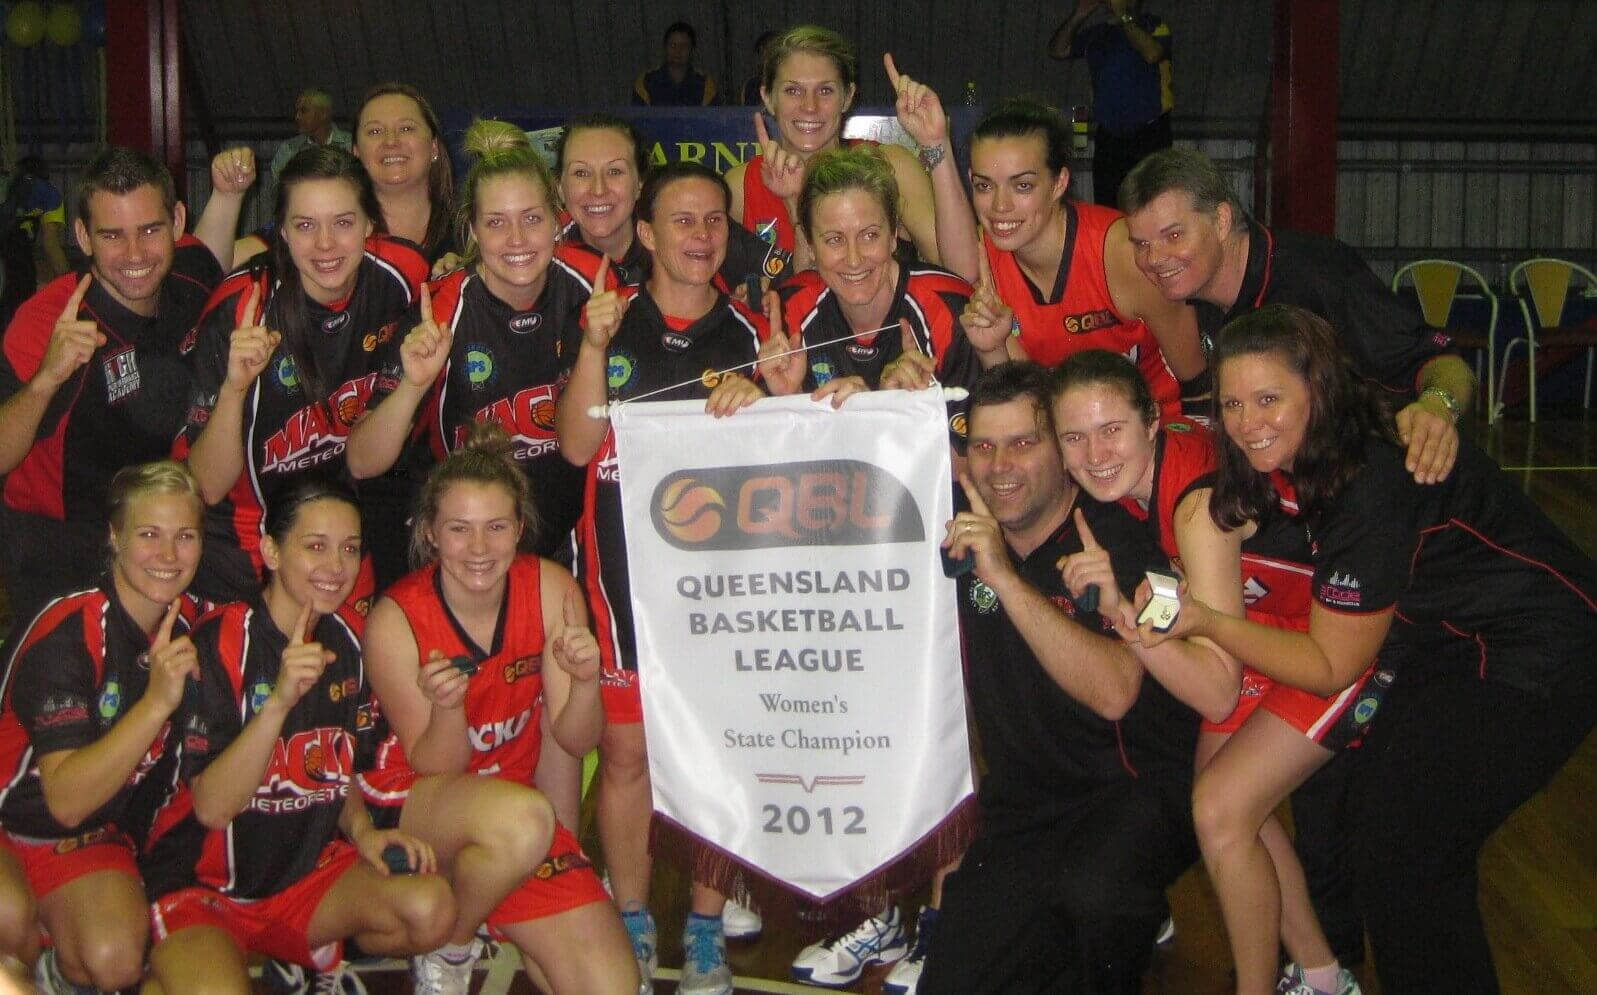 Championship Teams - 2012 Global Product Search Mackay Meteorettes Overall Record - 15 wins & 4 losses at Mackay Basketball